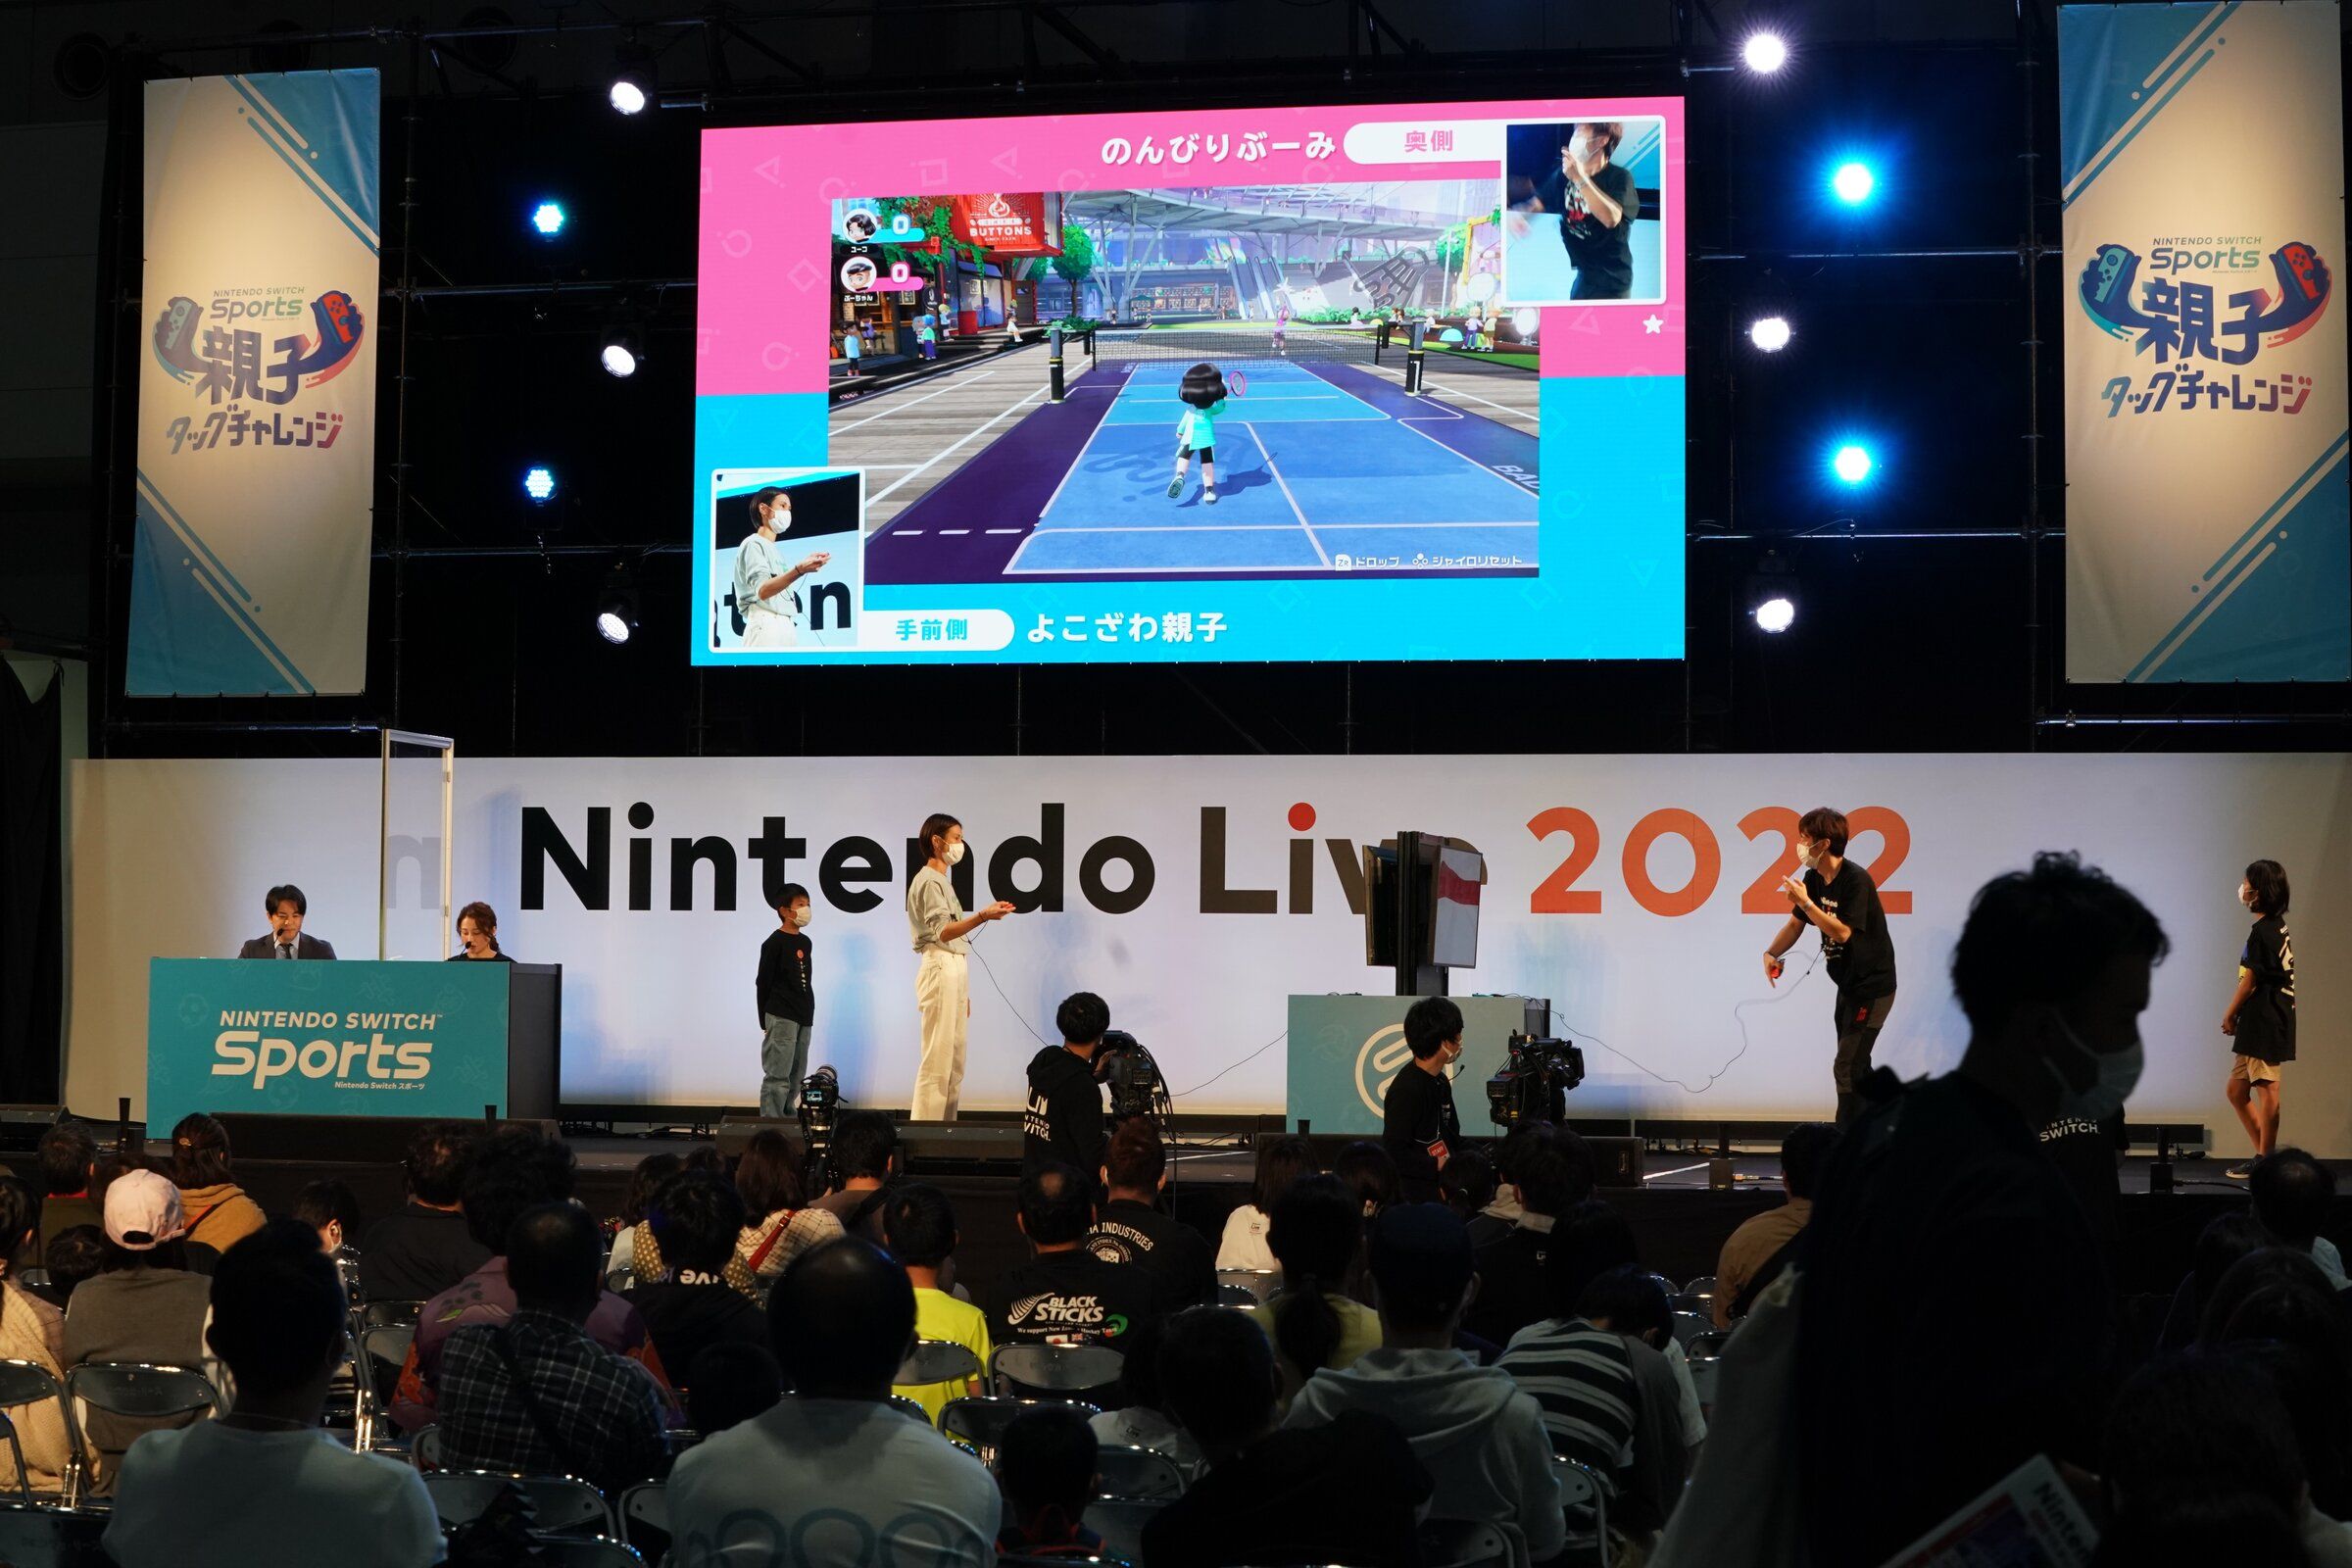 Nintendo Live 2023 coming to Seattle; here's how to register for